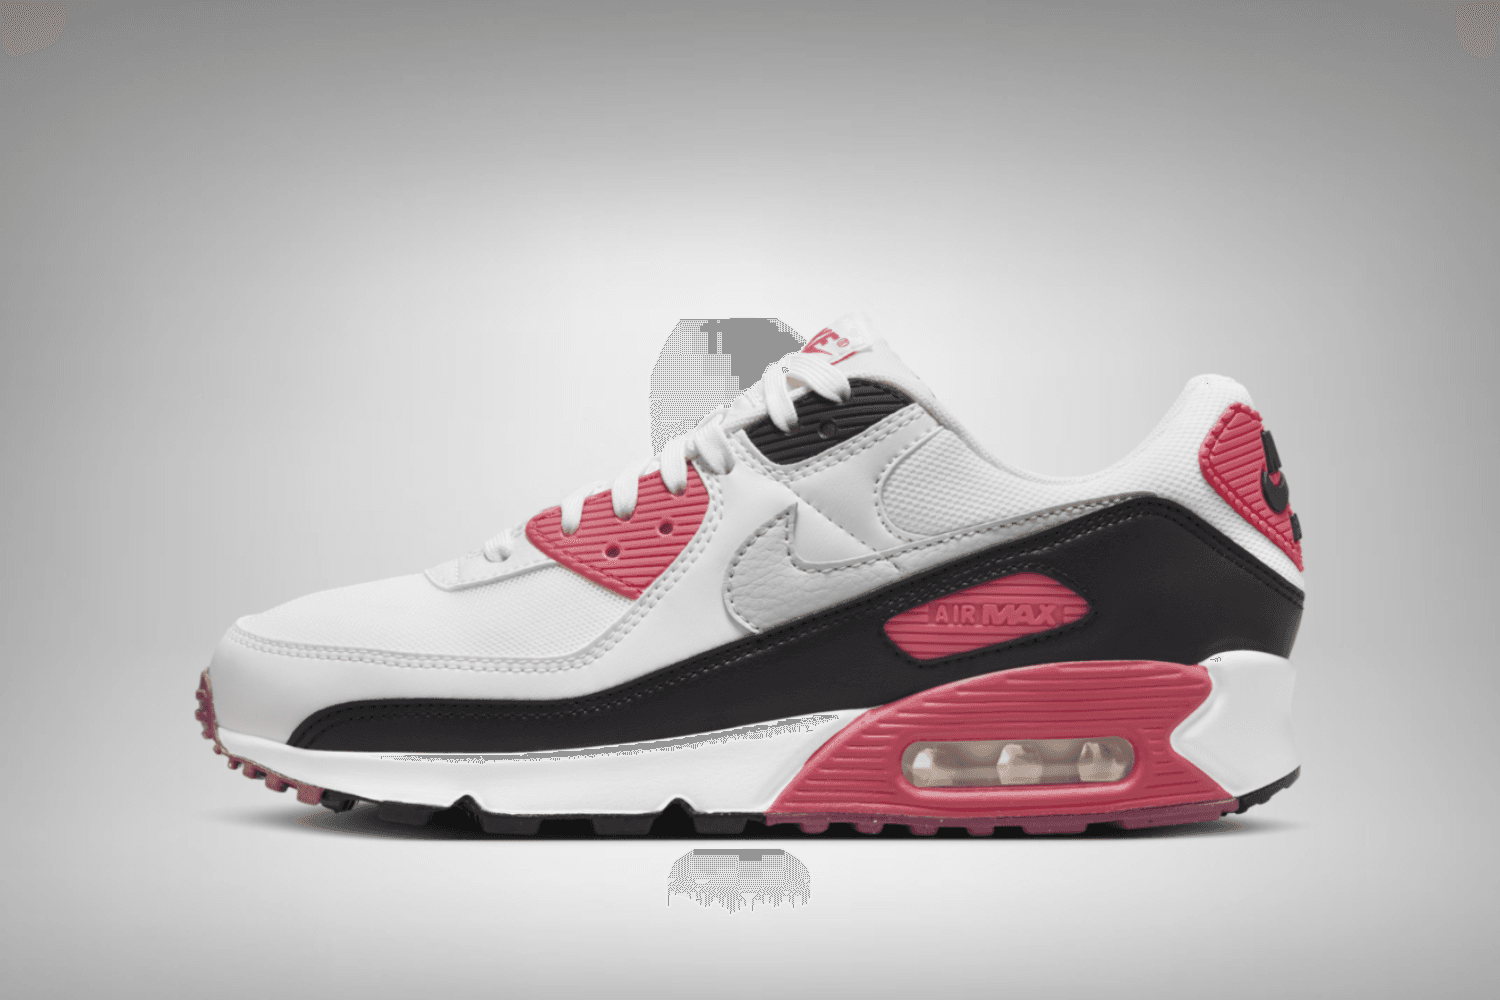 The Nike Air Max 90 'Aster Pink' is inspired by the OG 'Infrared' colorway